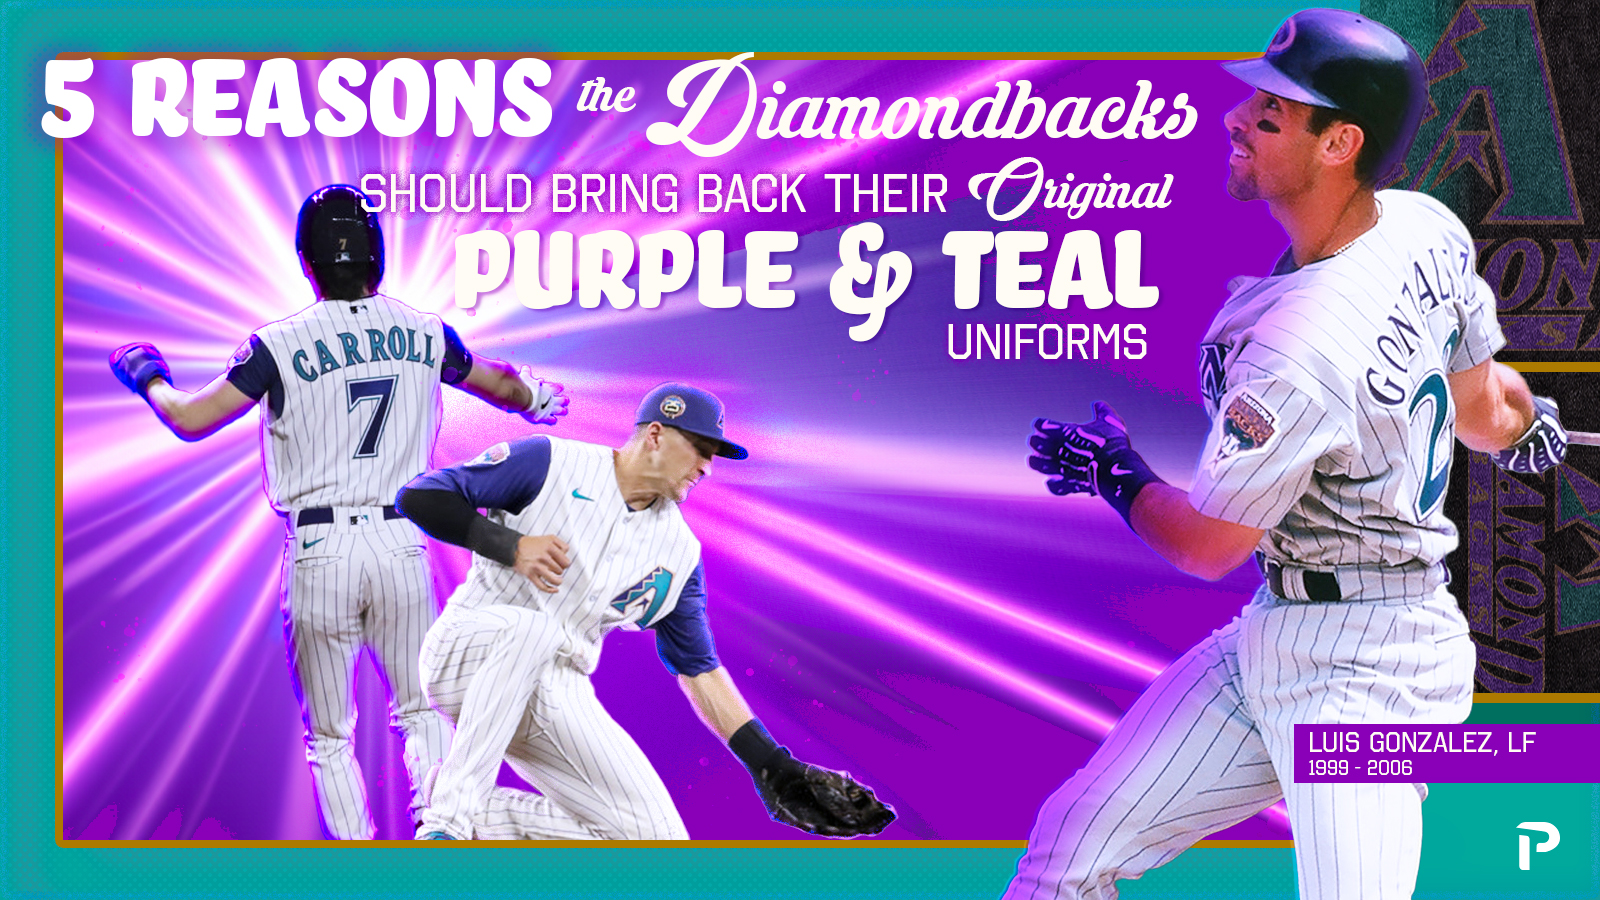 D-backs wearing throwback uniforms for anniversary celebration